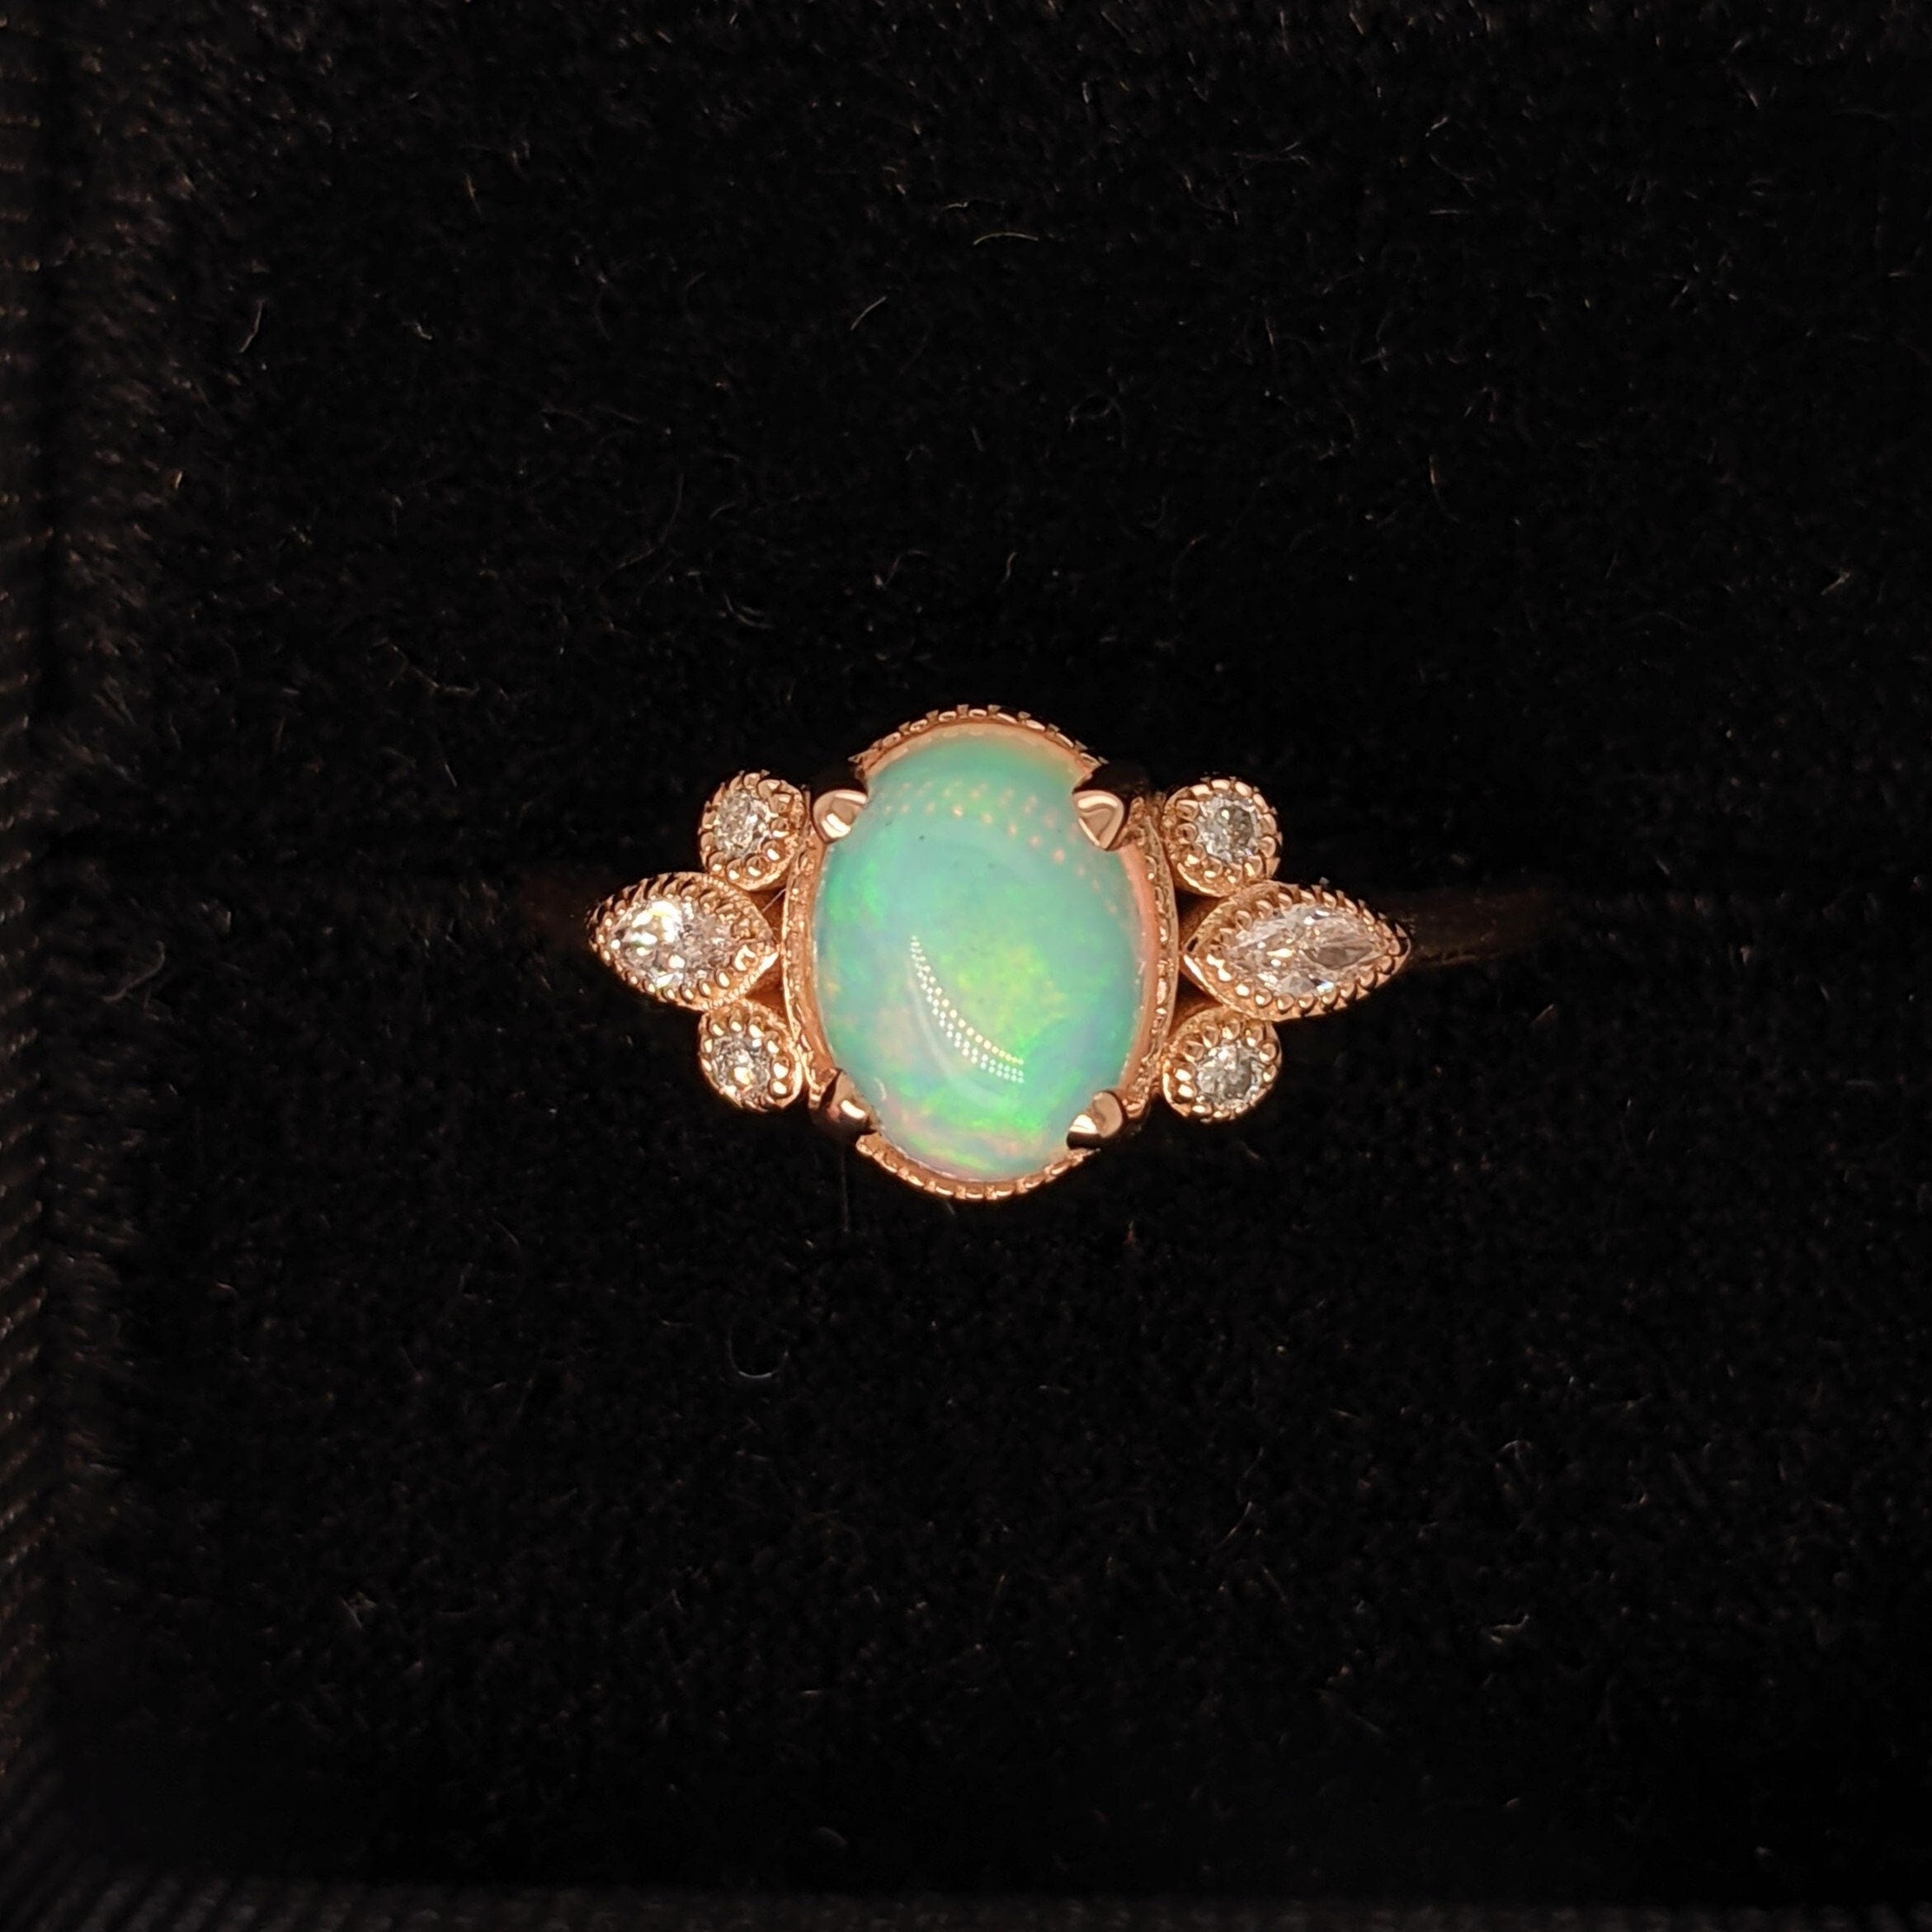 Colorful Ethiopian Opal Ring with Diamond Accents in Solid 14k Rose Gold | Oval 8x6mm | Milgrain | Gemstone Jewelry | October Birthstone